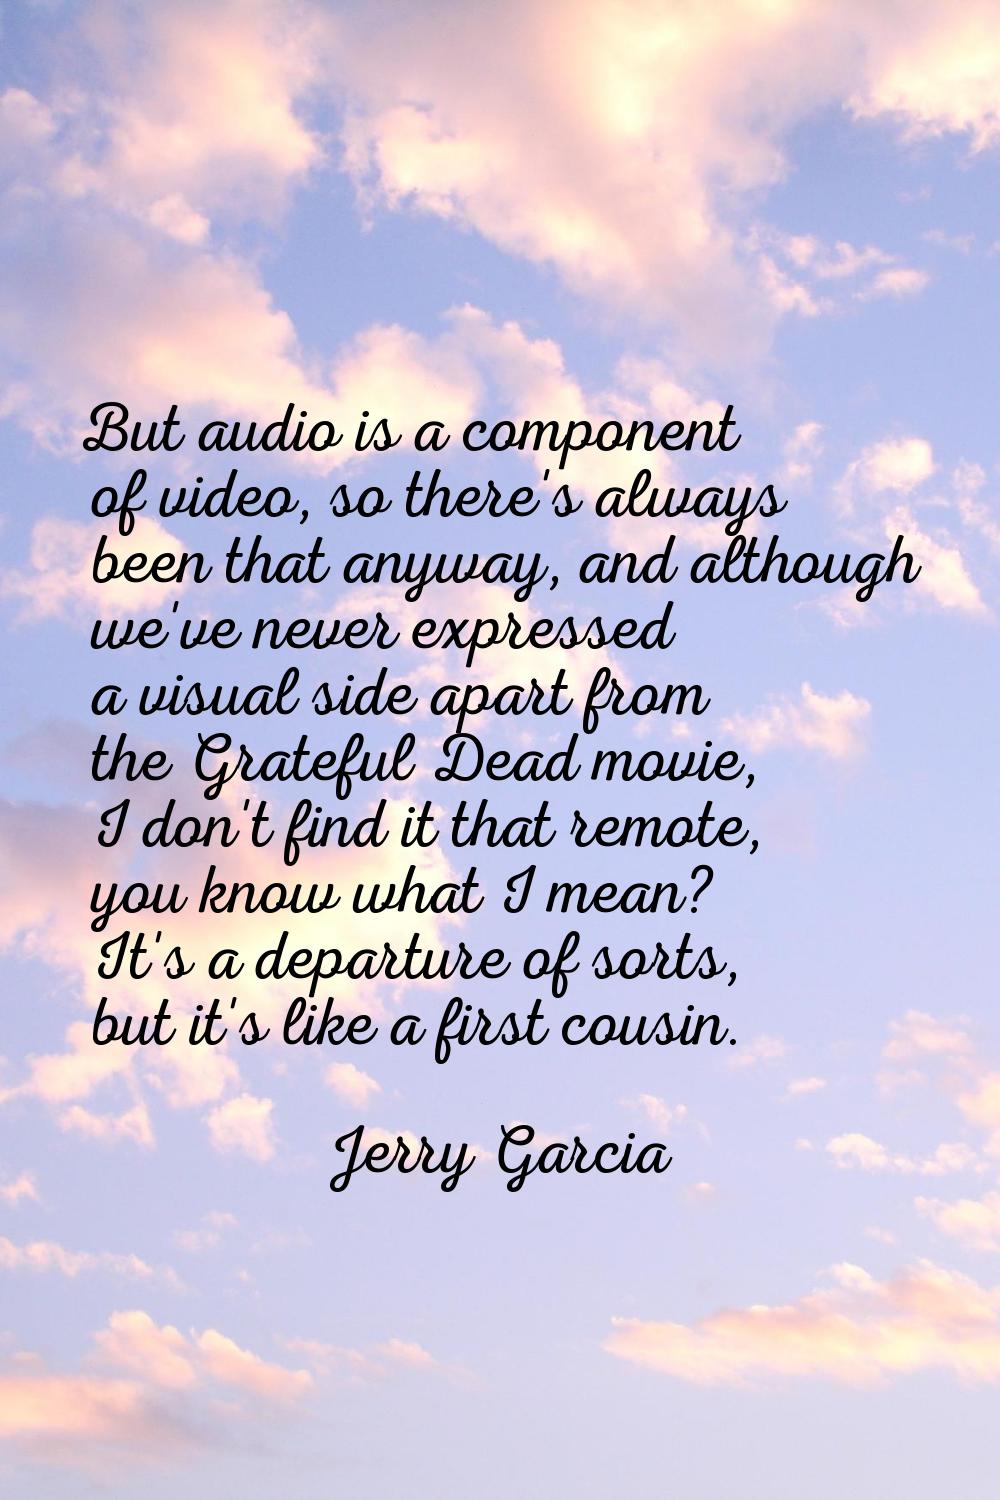 But audio is a component of video, so there's always been that anyway, and although we've never exp